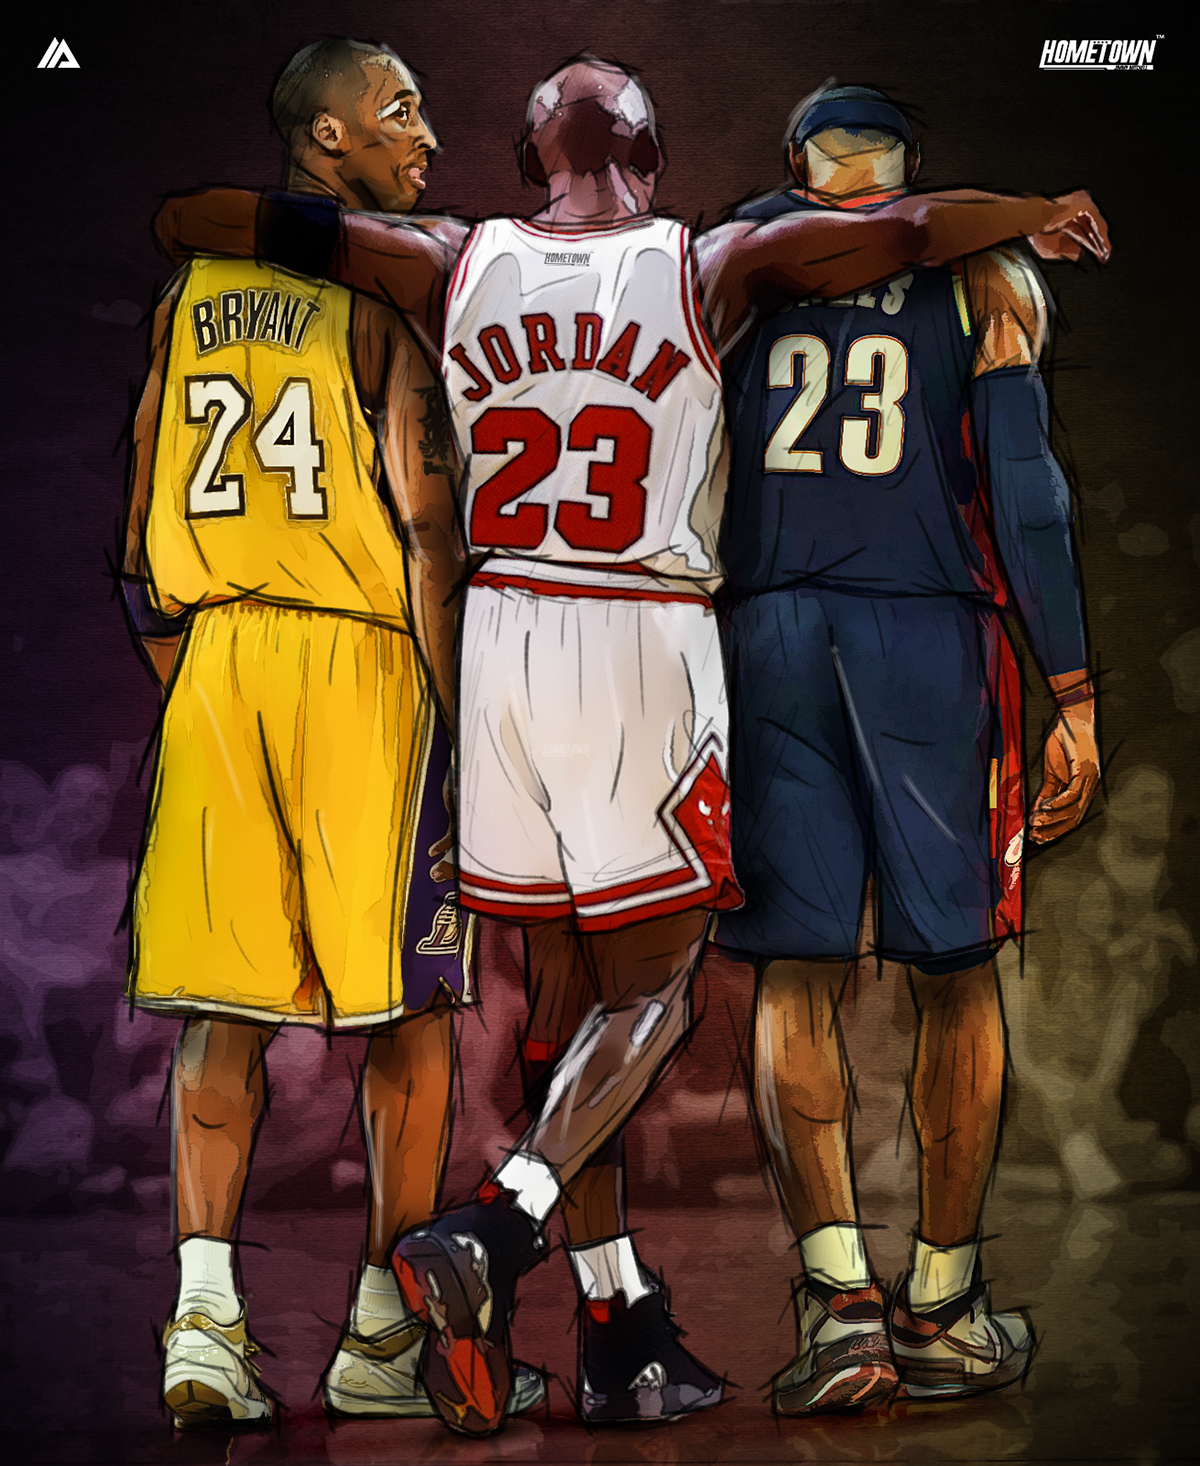 The greats.